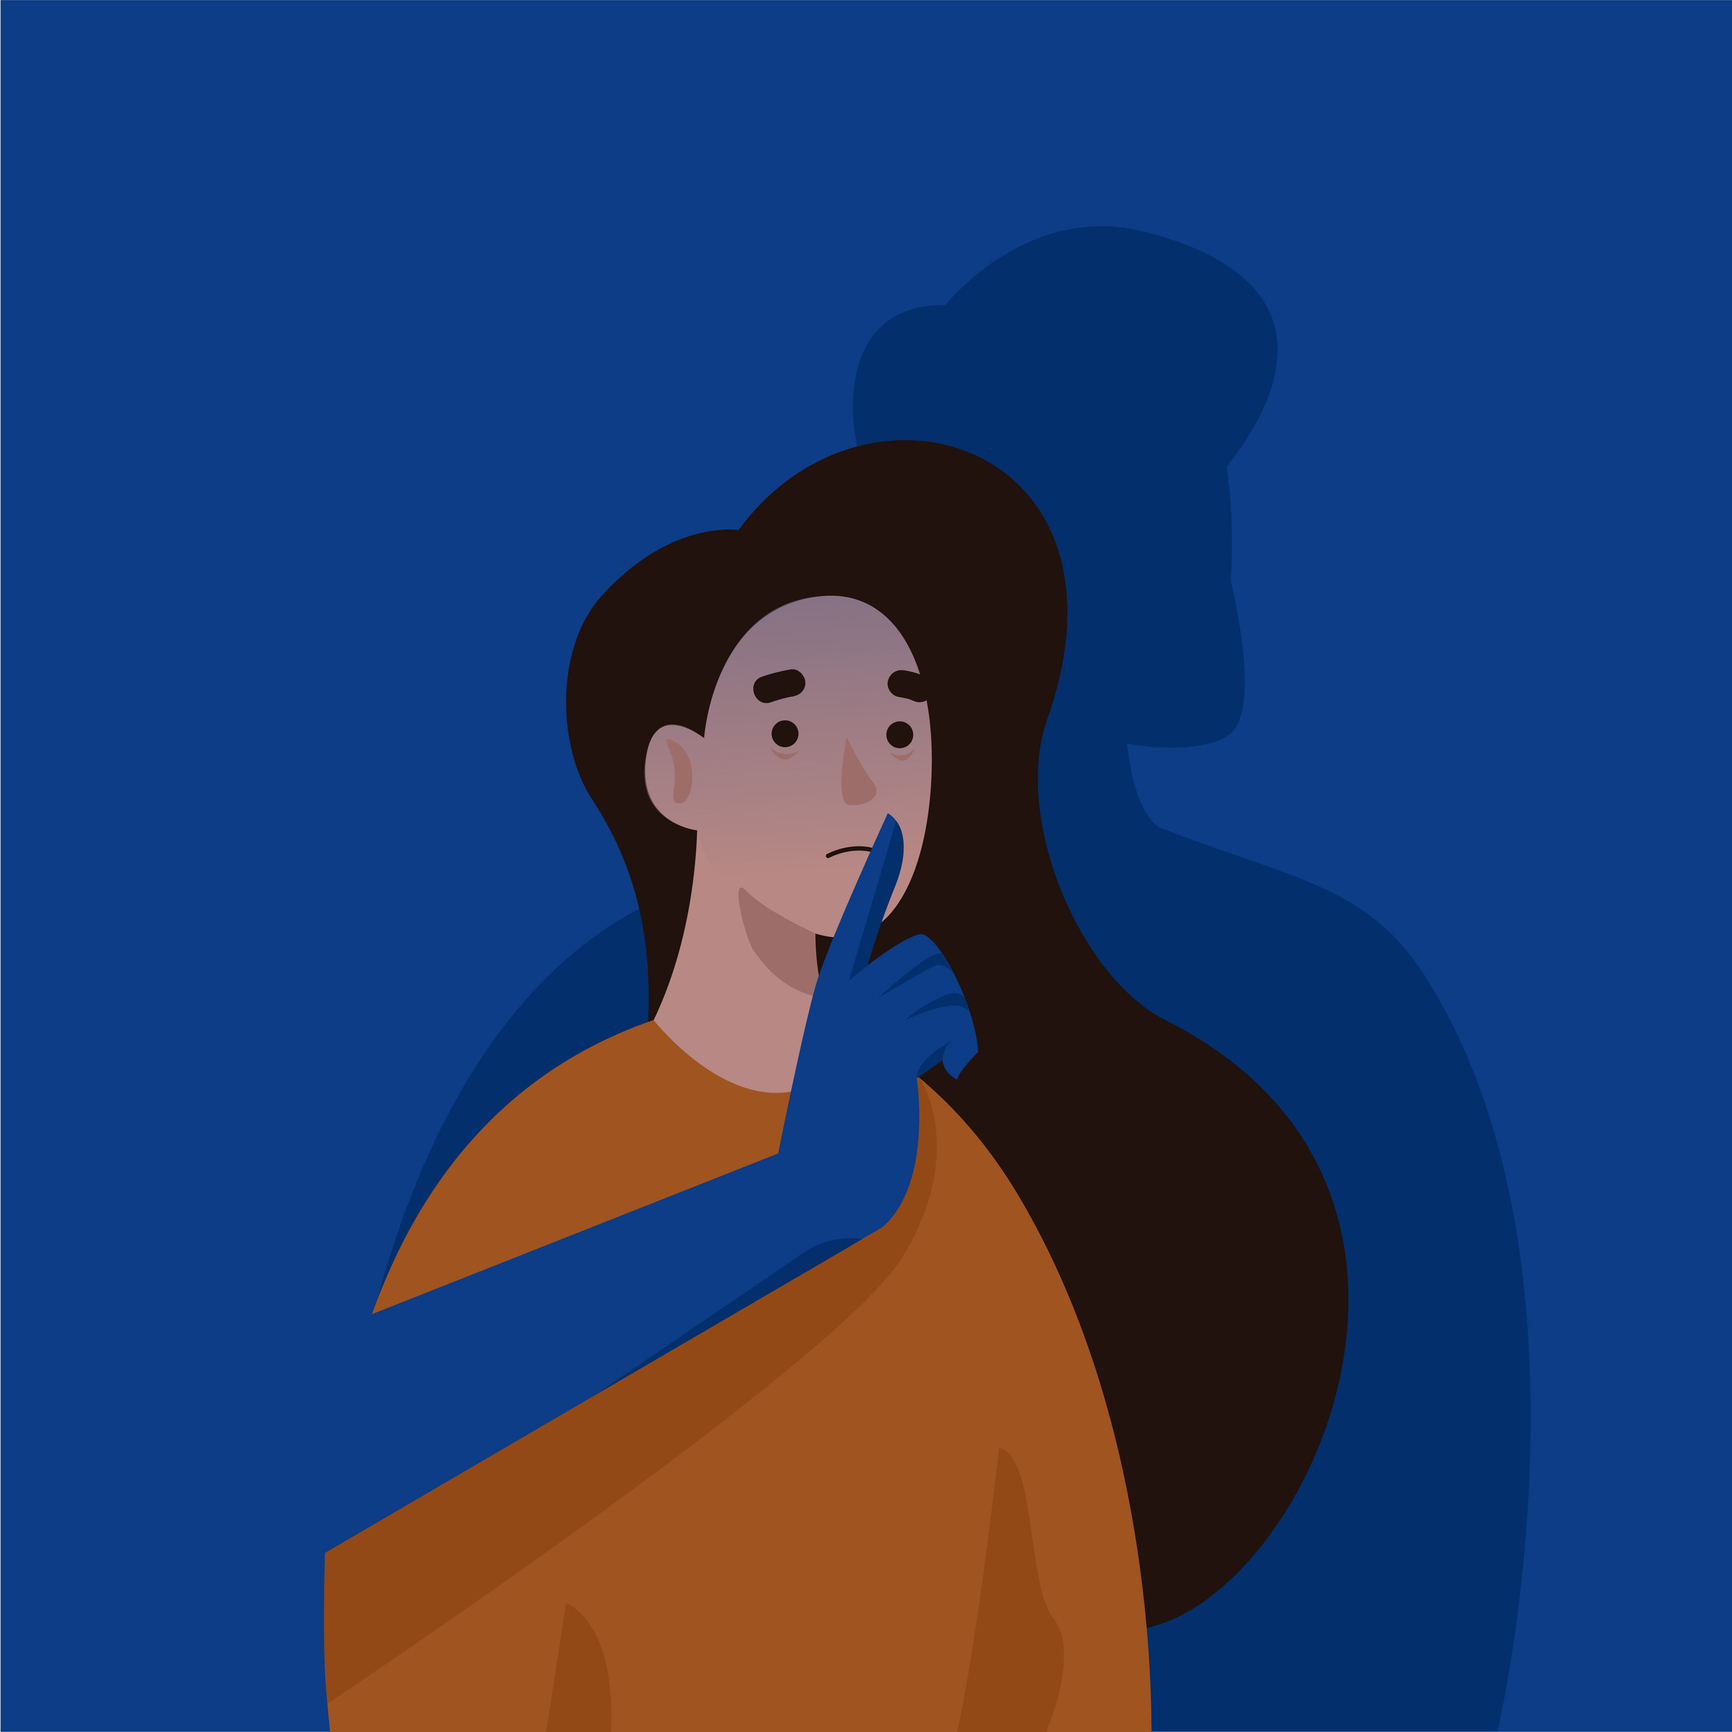 An illustration of a woman being silenced by a man